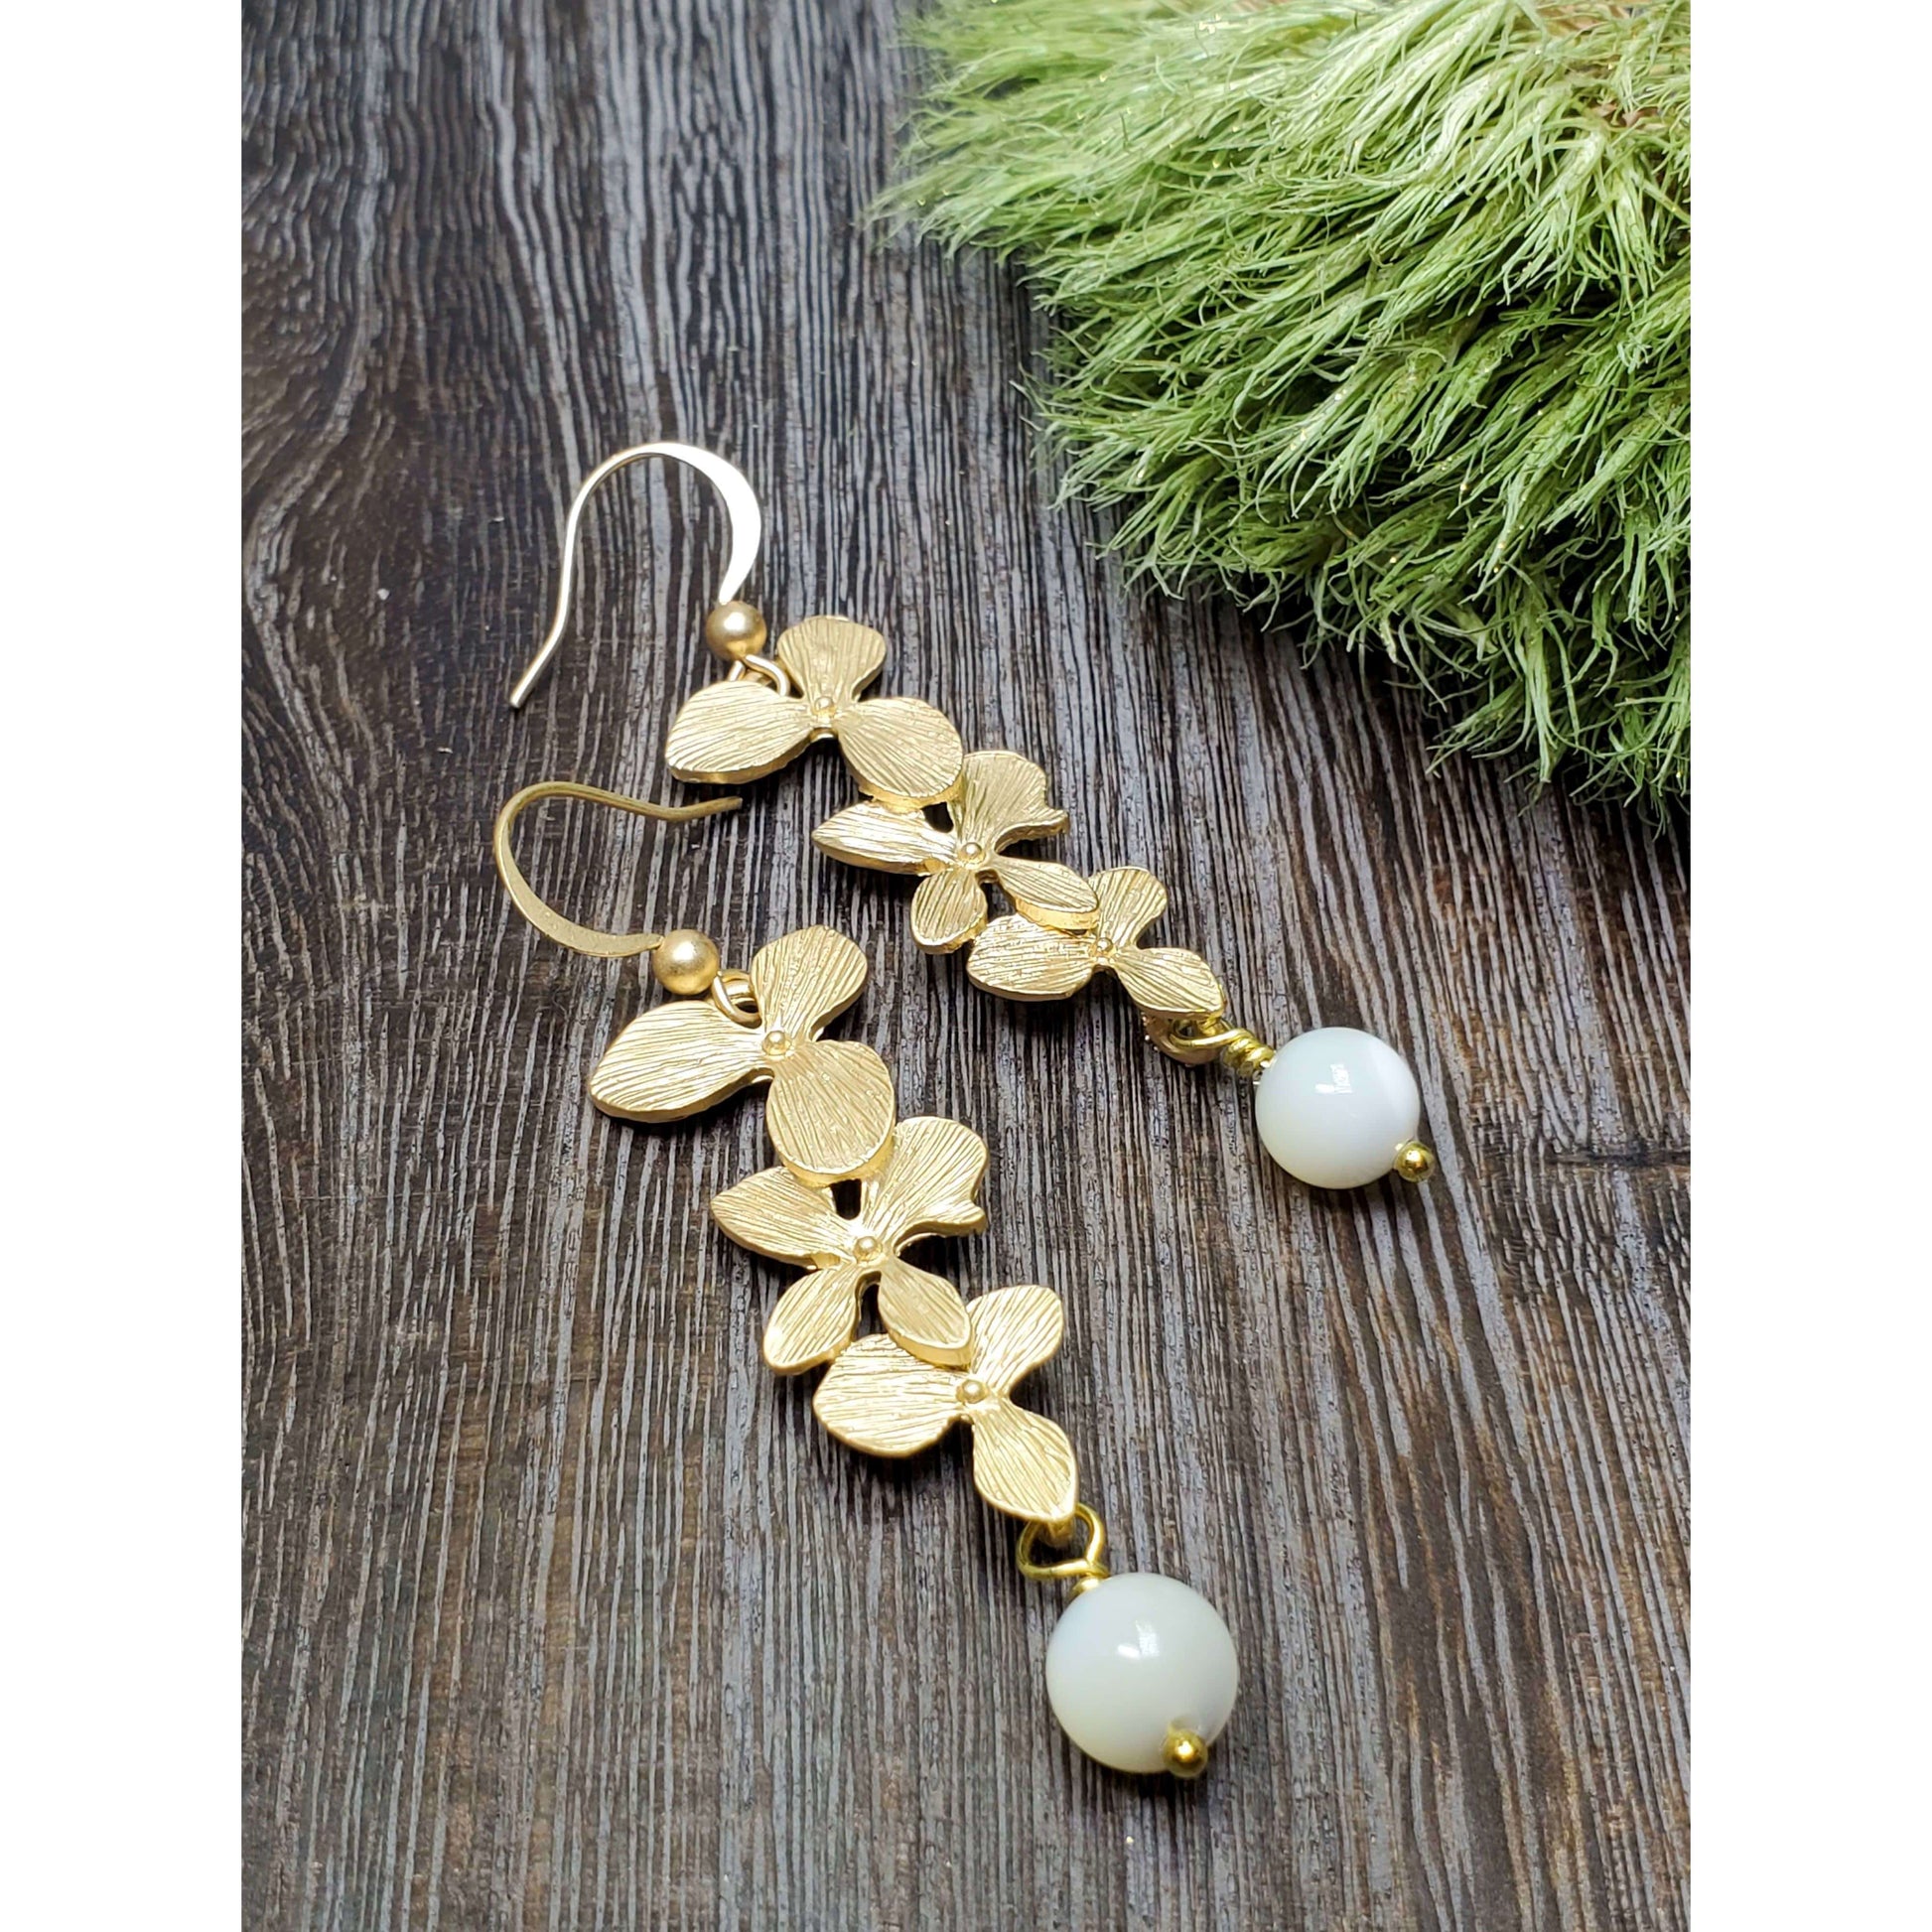 Cascading Orchid Earrings - Gold-White Shell - Nicki Lynn Jewelry